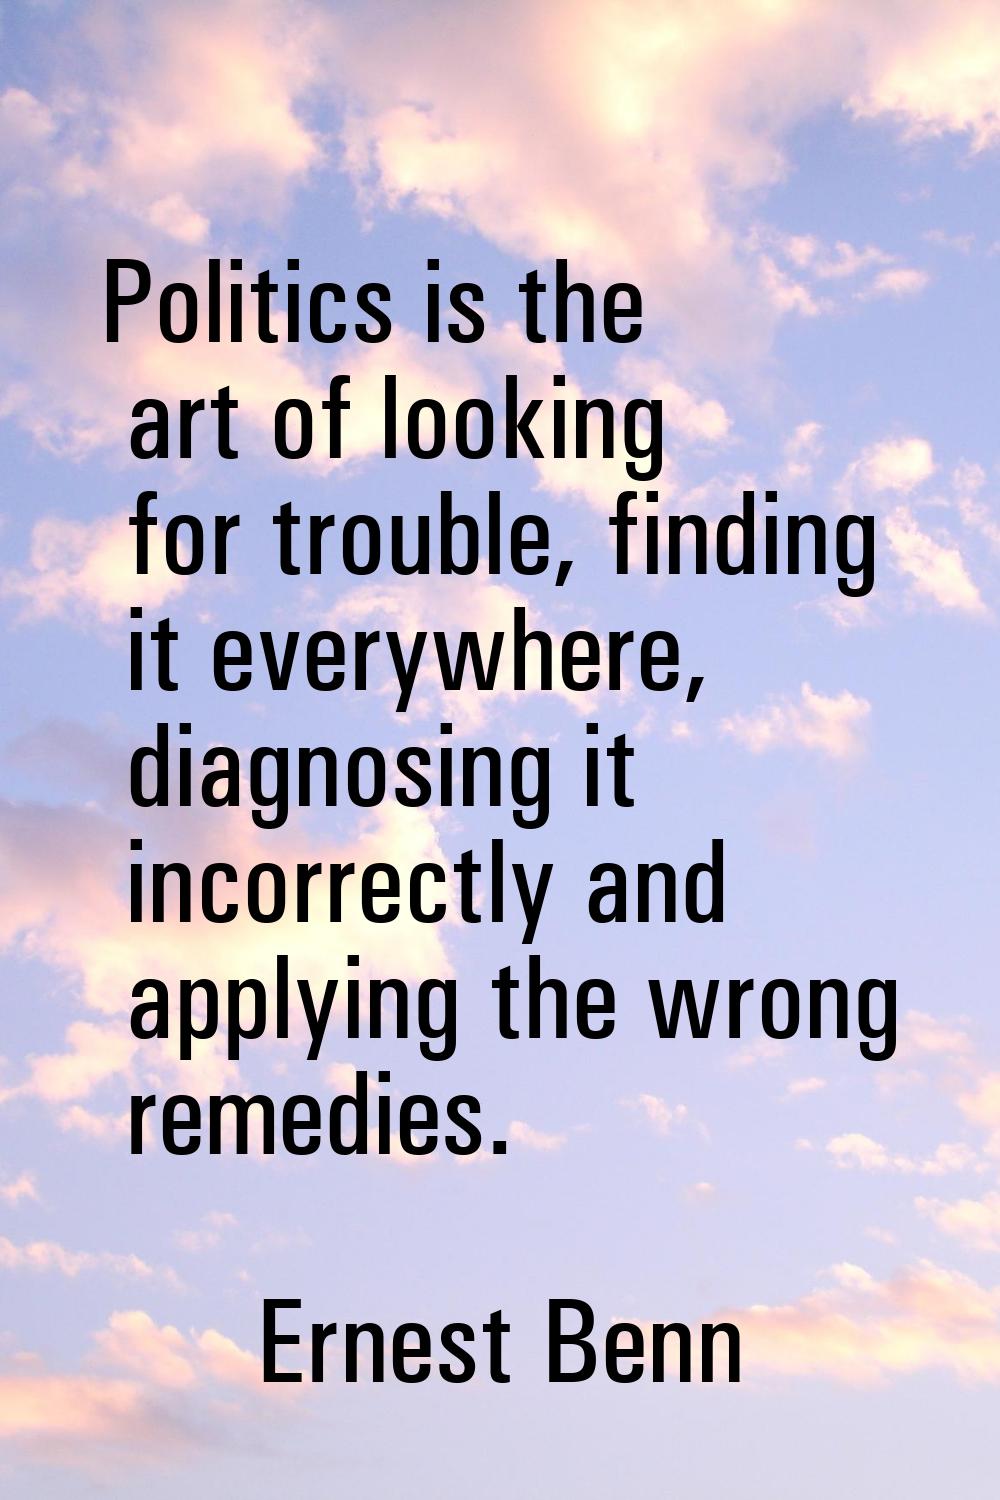 Politics is the art of looking for trouble, finding it everywhere, diagnosing it incorrectly and ap